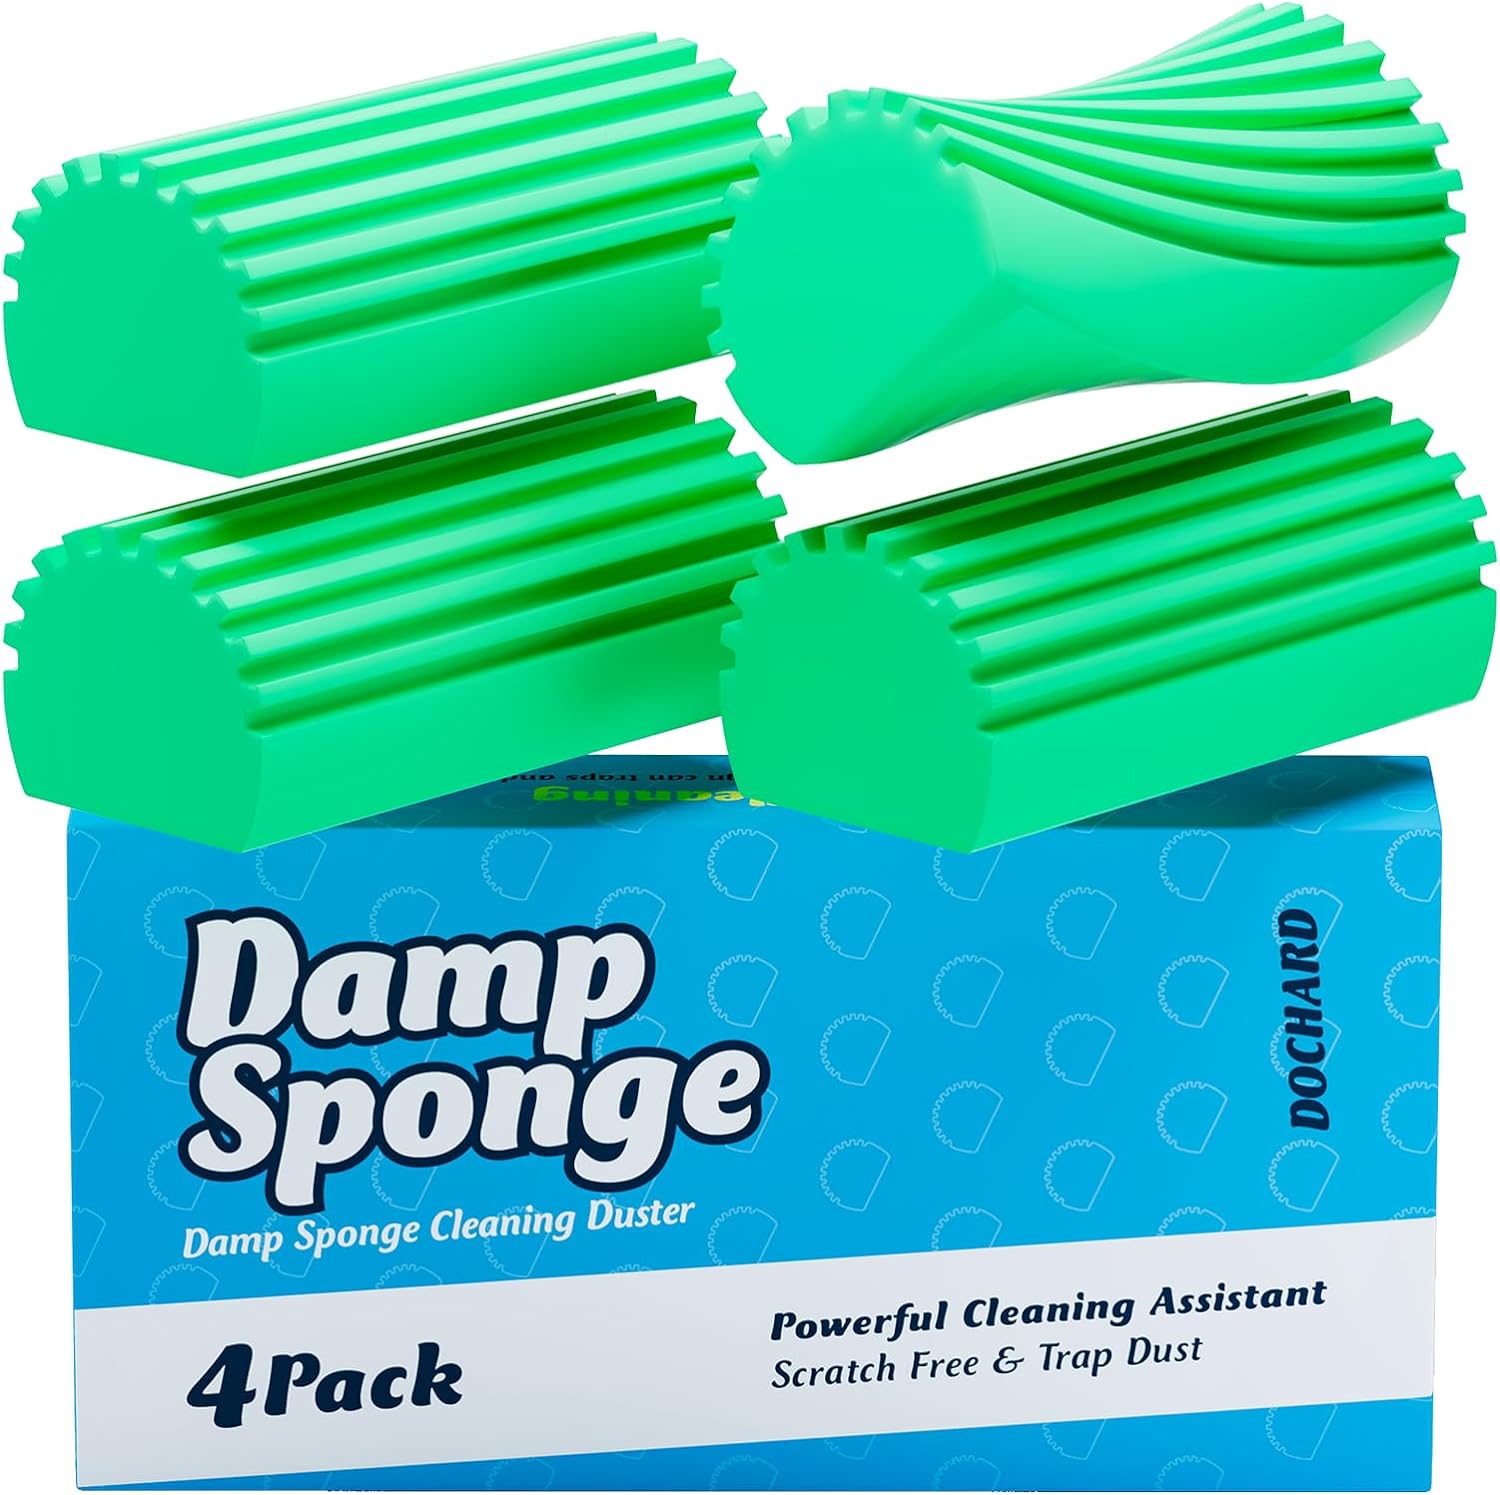 DOCHARD Damp Cleaning Sponge Duster, 4-Pack Squishy Wet Reusable Non Scratch Sponges Kitchen, Super Absorbent Sponge with Ridges for Household or Car - Green